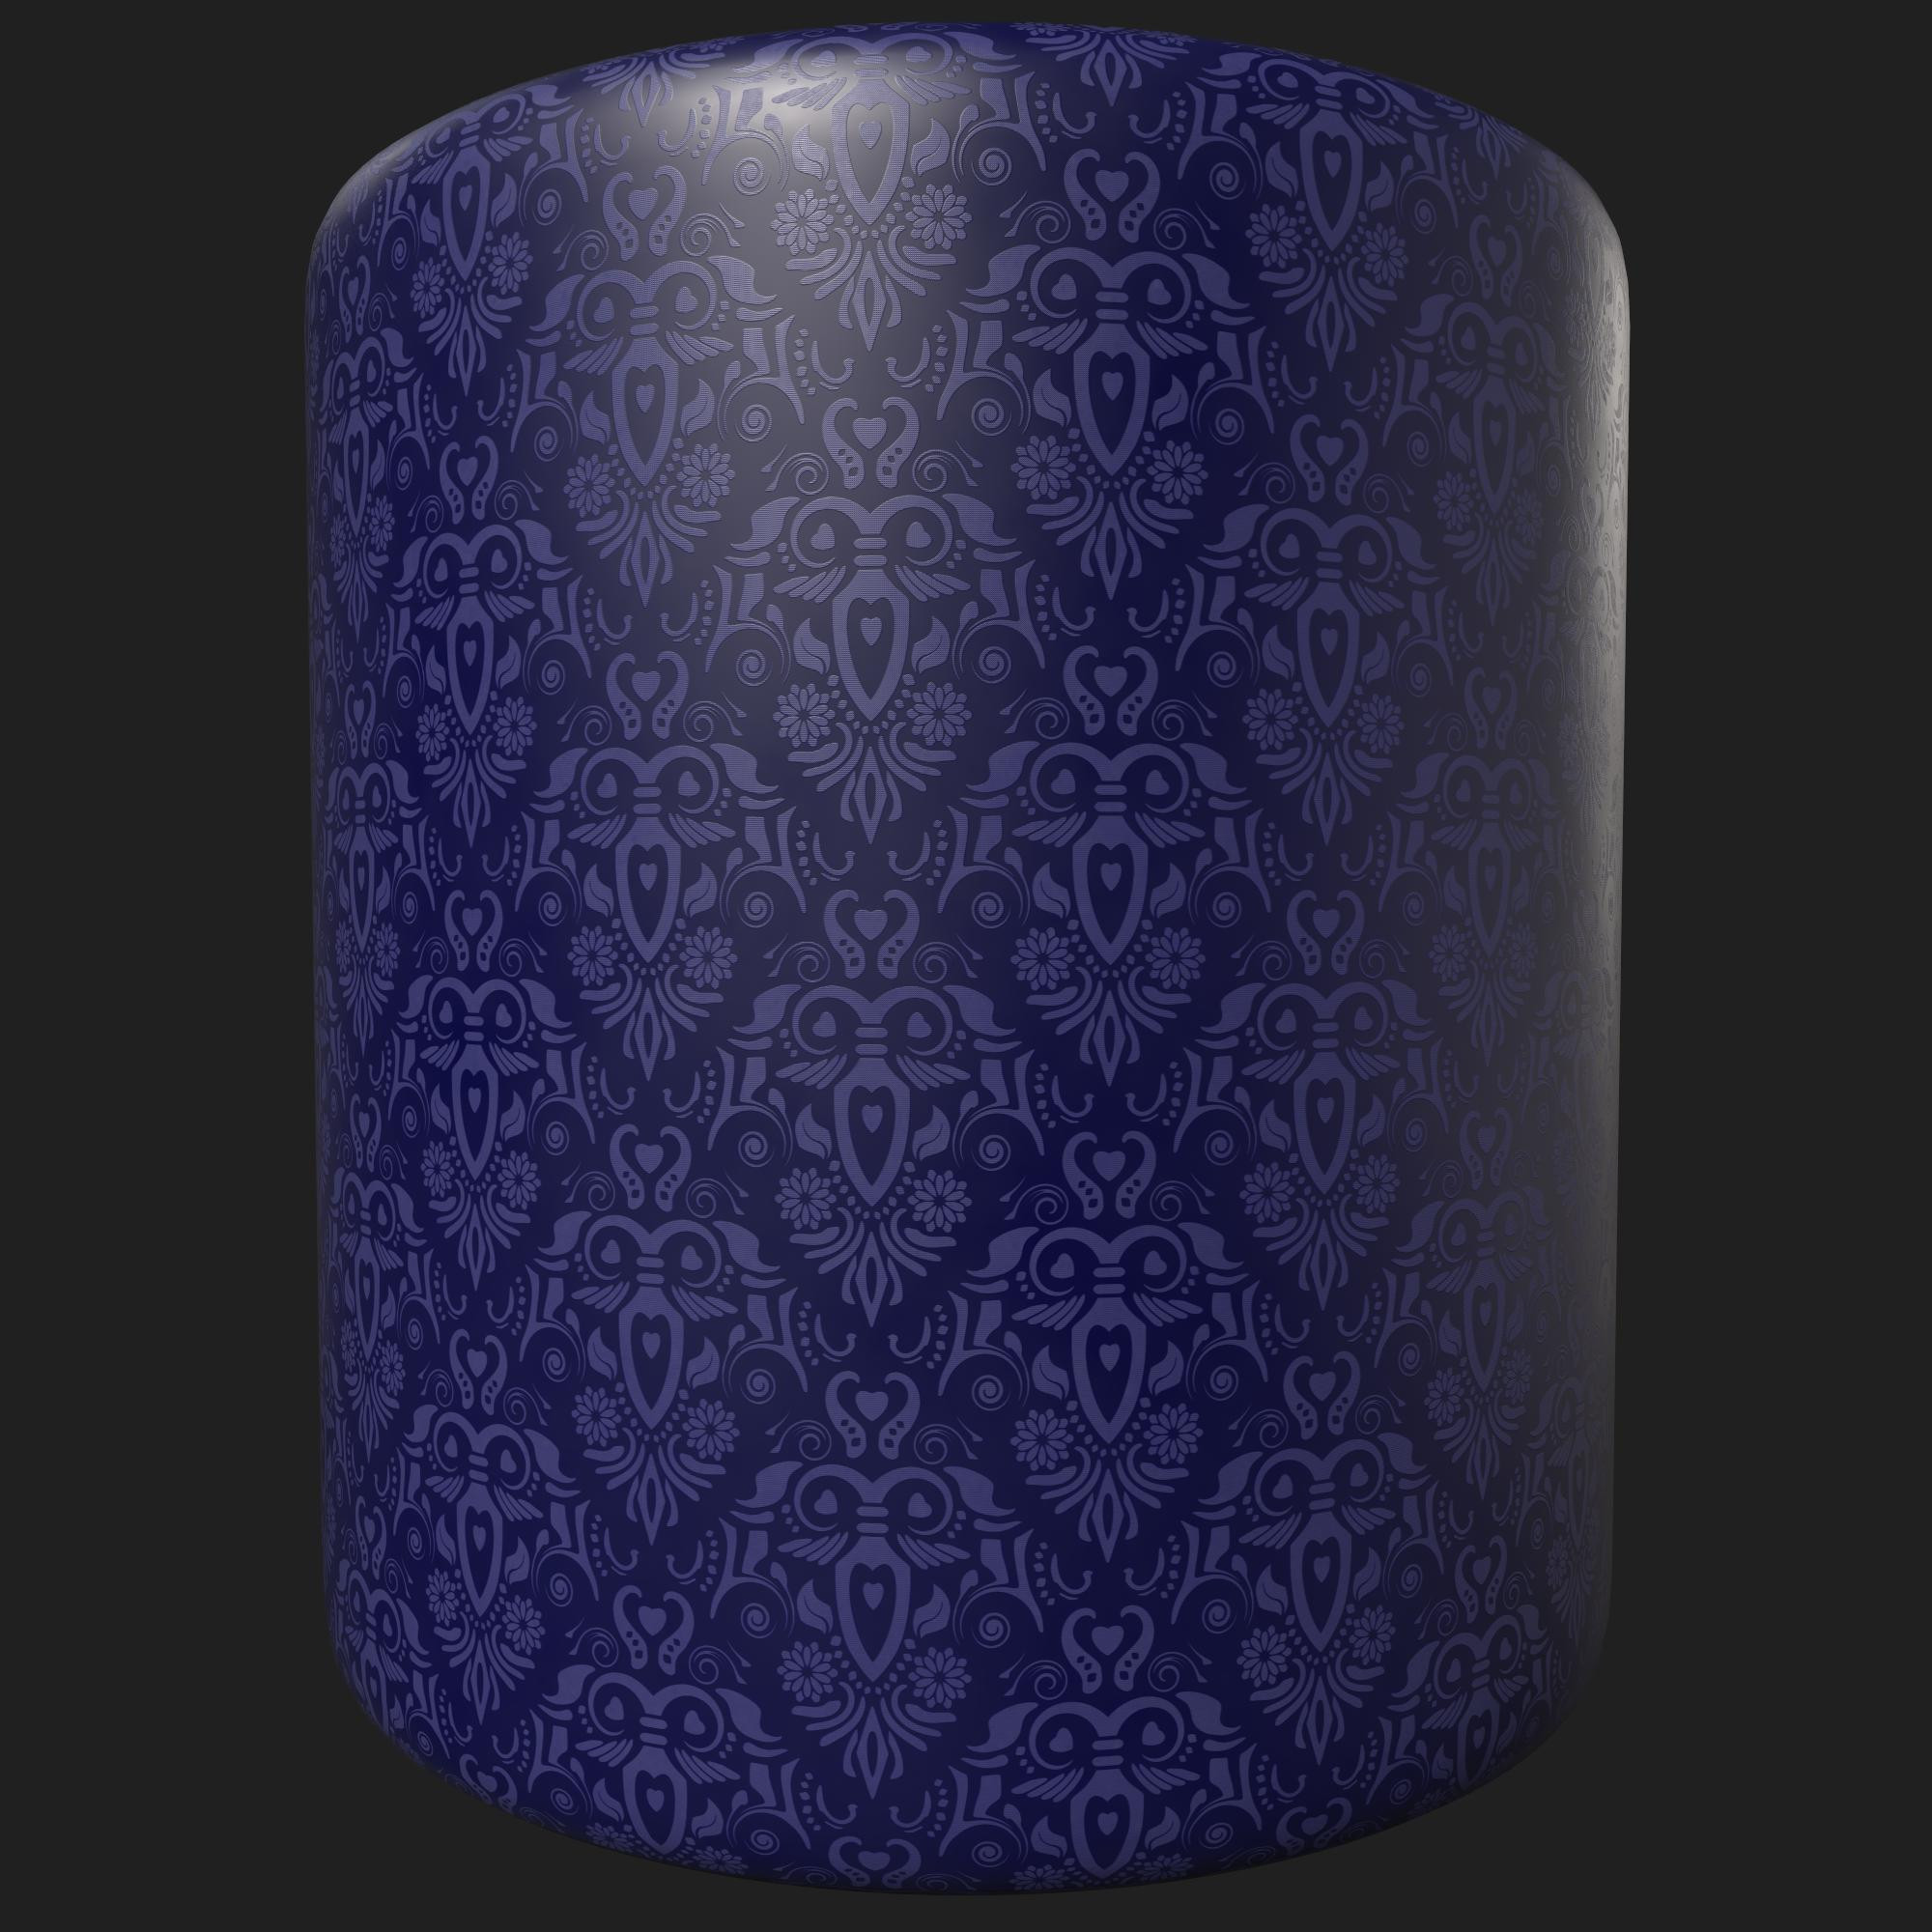 The wallpaper pattern, created and rendered in Substance Designer